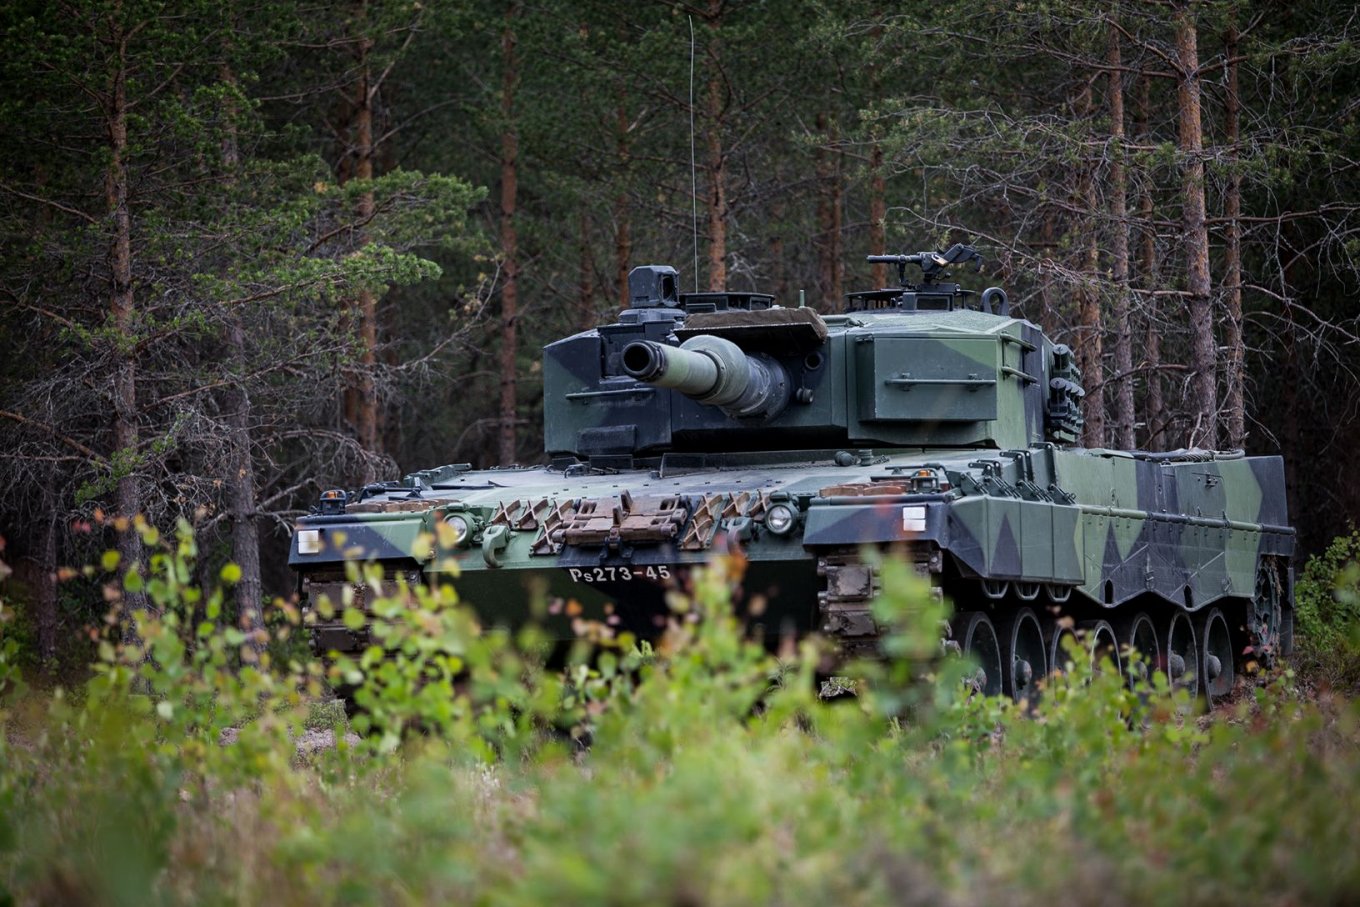 Leopard 2 From Finland And Other Allies For Ukraine: How Real Their Transfer Is, Defense Express, war in Ukraine, Russian-Ukrainian war